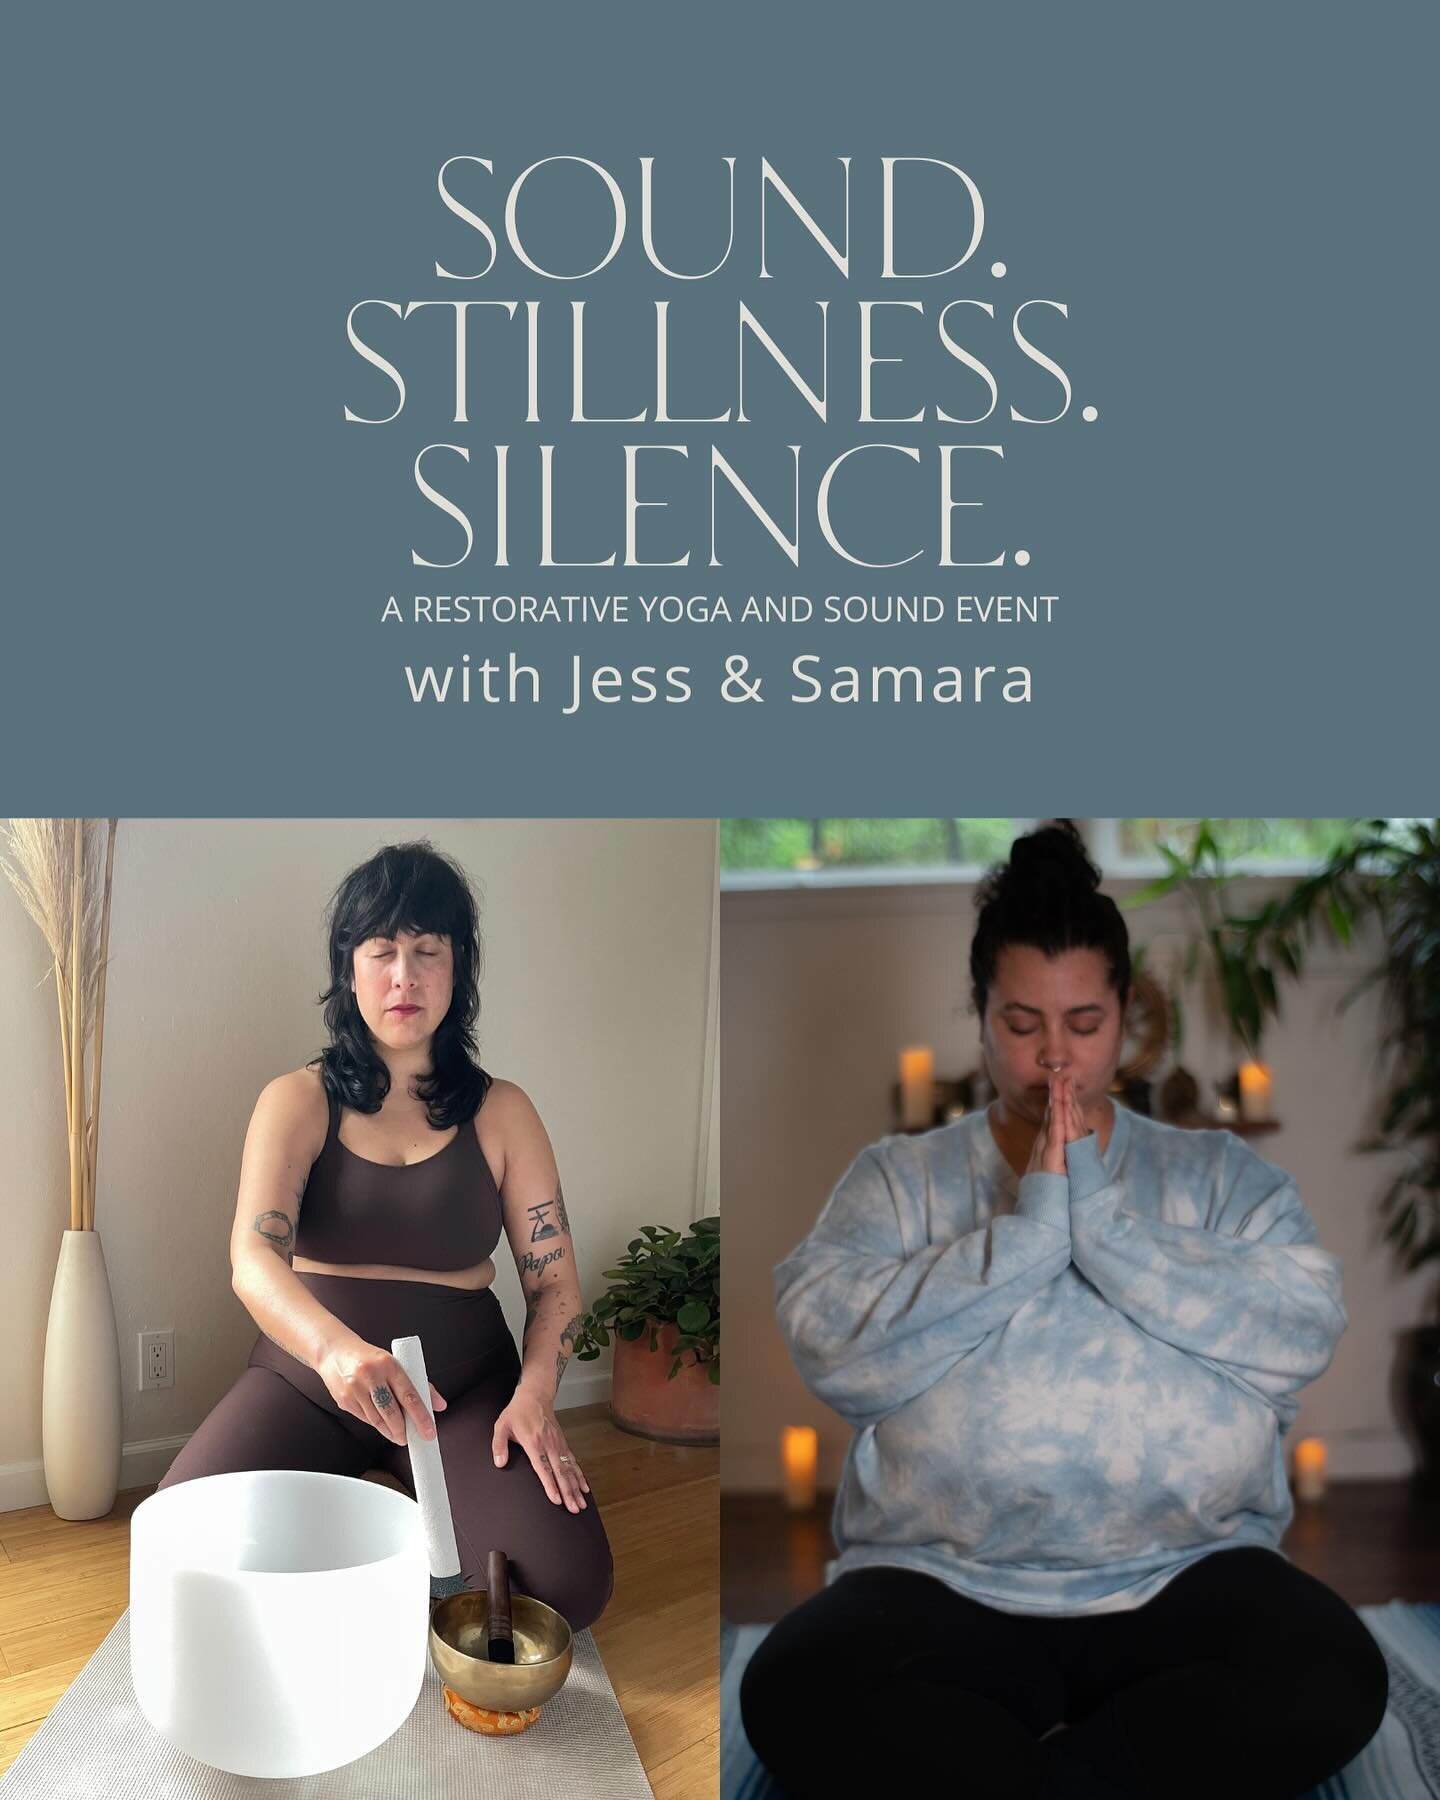 Join @jessica_wybenga &amp; @samaraisresting this Sunday, January 21st at 5:00pm in the studio for Sound. Stillness. Silence.

That&rsquo;s right this popular duo is back! Join Jess and Samara on a journey through blissful sound supported by a delici